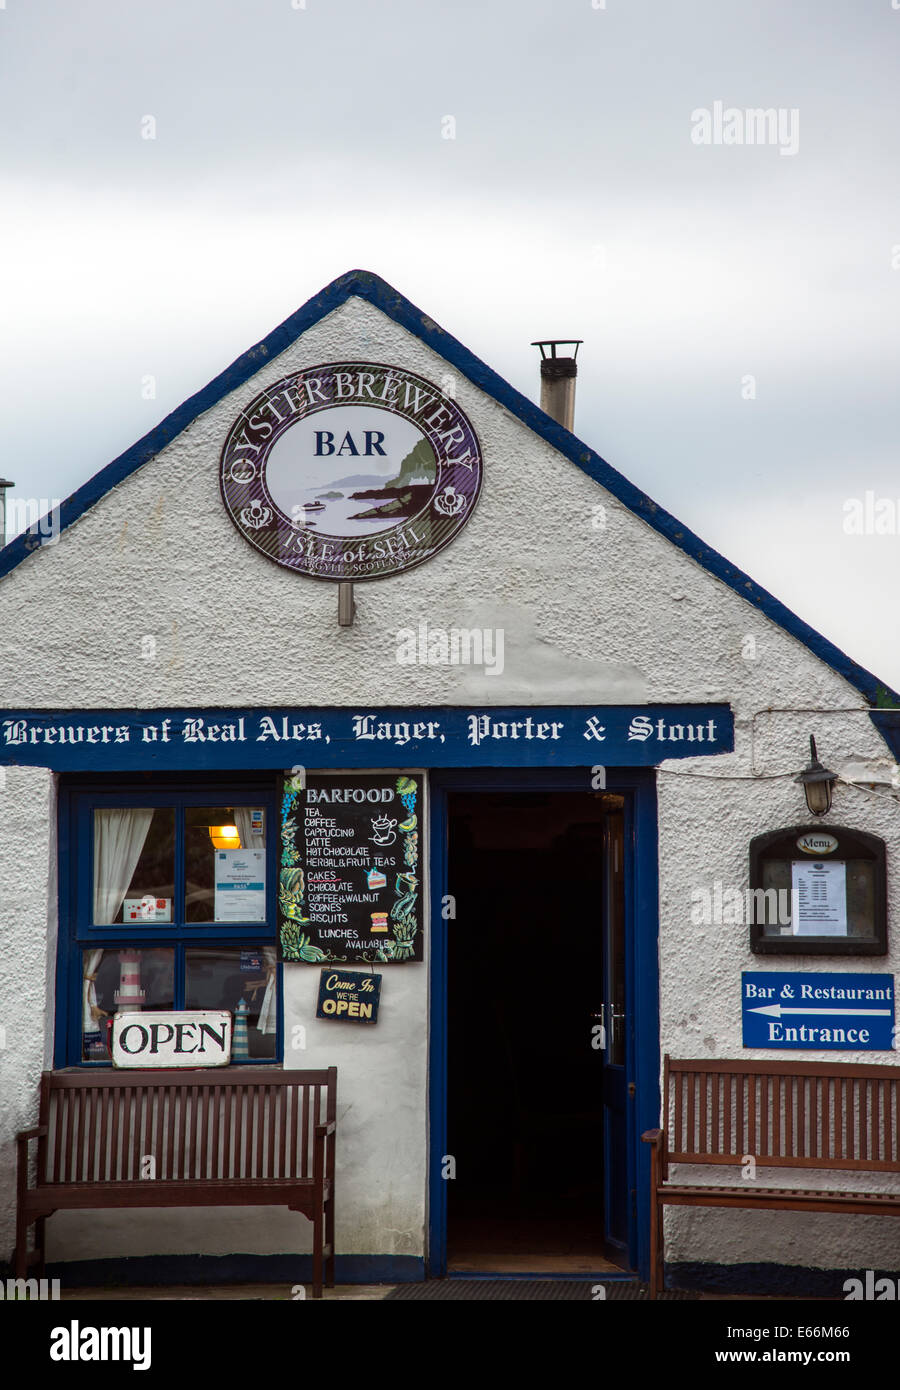 The entrance to the Oyster Brewery Bar, Isle of Seil, Argyle, Scotland. Stock Photo